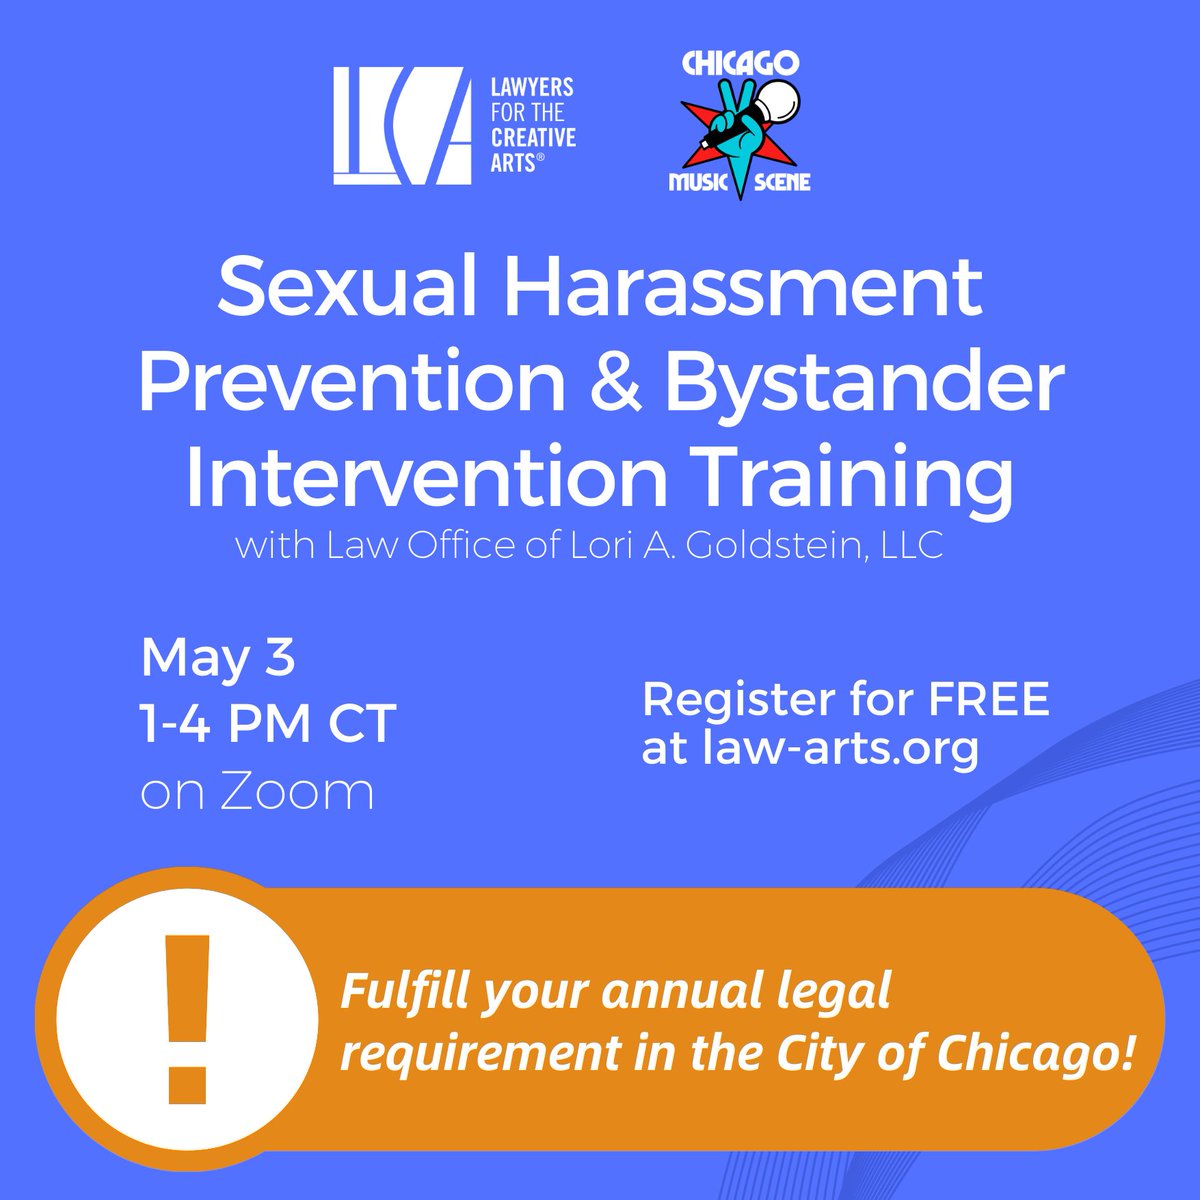 👉 This training satisfies annual requirements for Chicago Employers. Even outside Chicago, if you have 1 or more employees in Illinois, compliance is key! 
#SexualHarassmentPrevention #BystanderIntervention